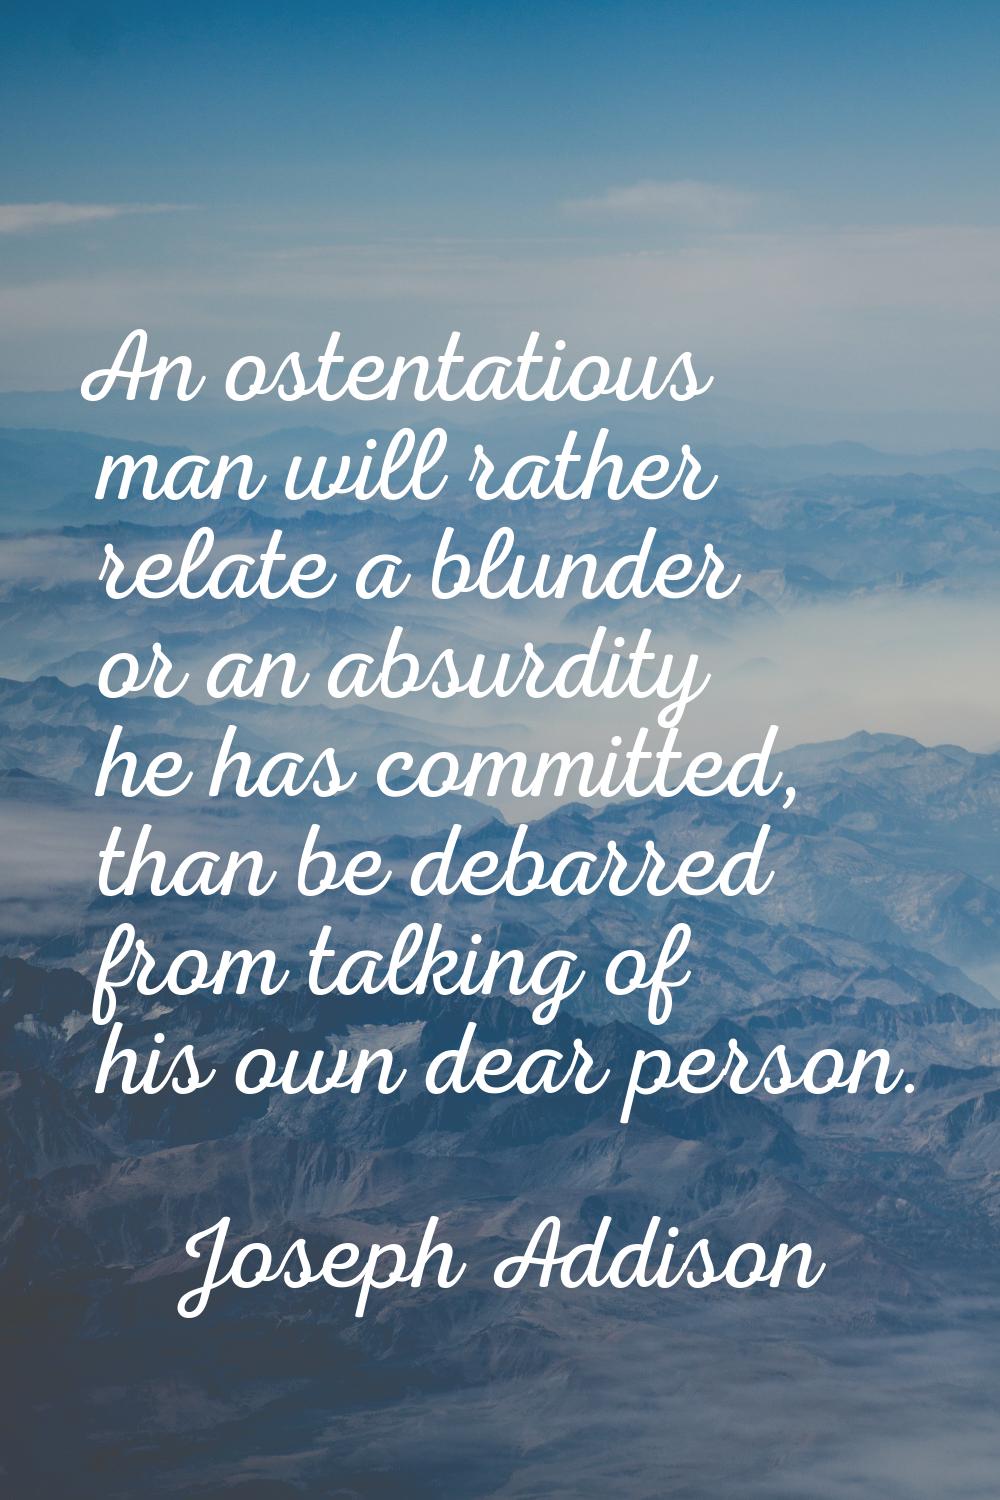 An ostentatious man will rather relate a blunder or an absurdity he has committed, than be debarred